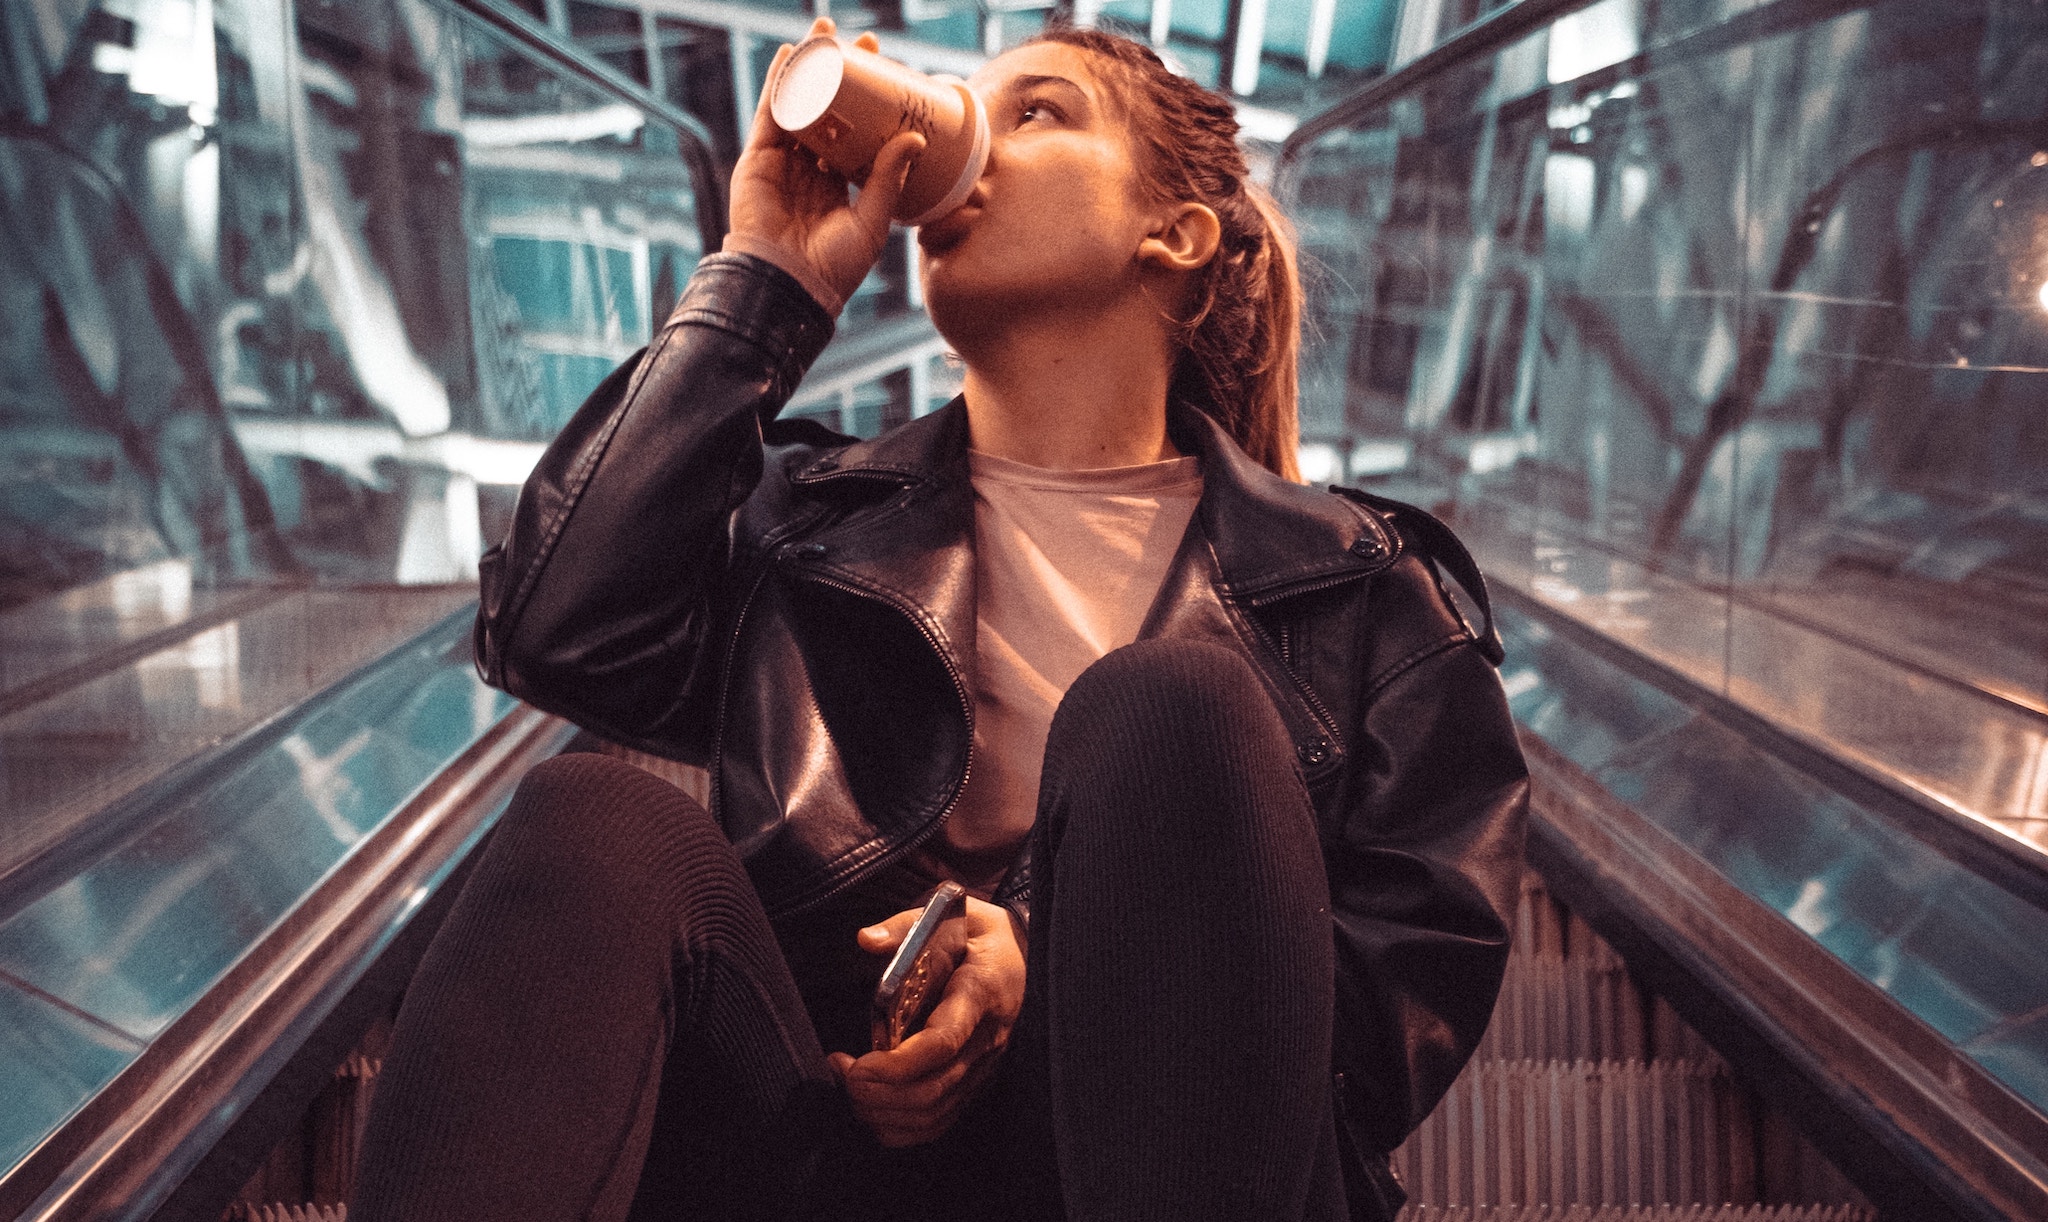 young woman drinking coffee in an airport, which is bad for jet lag